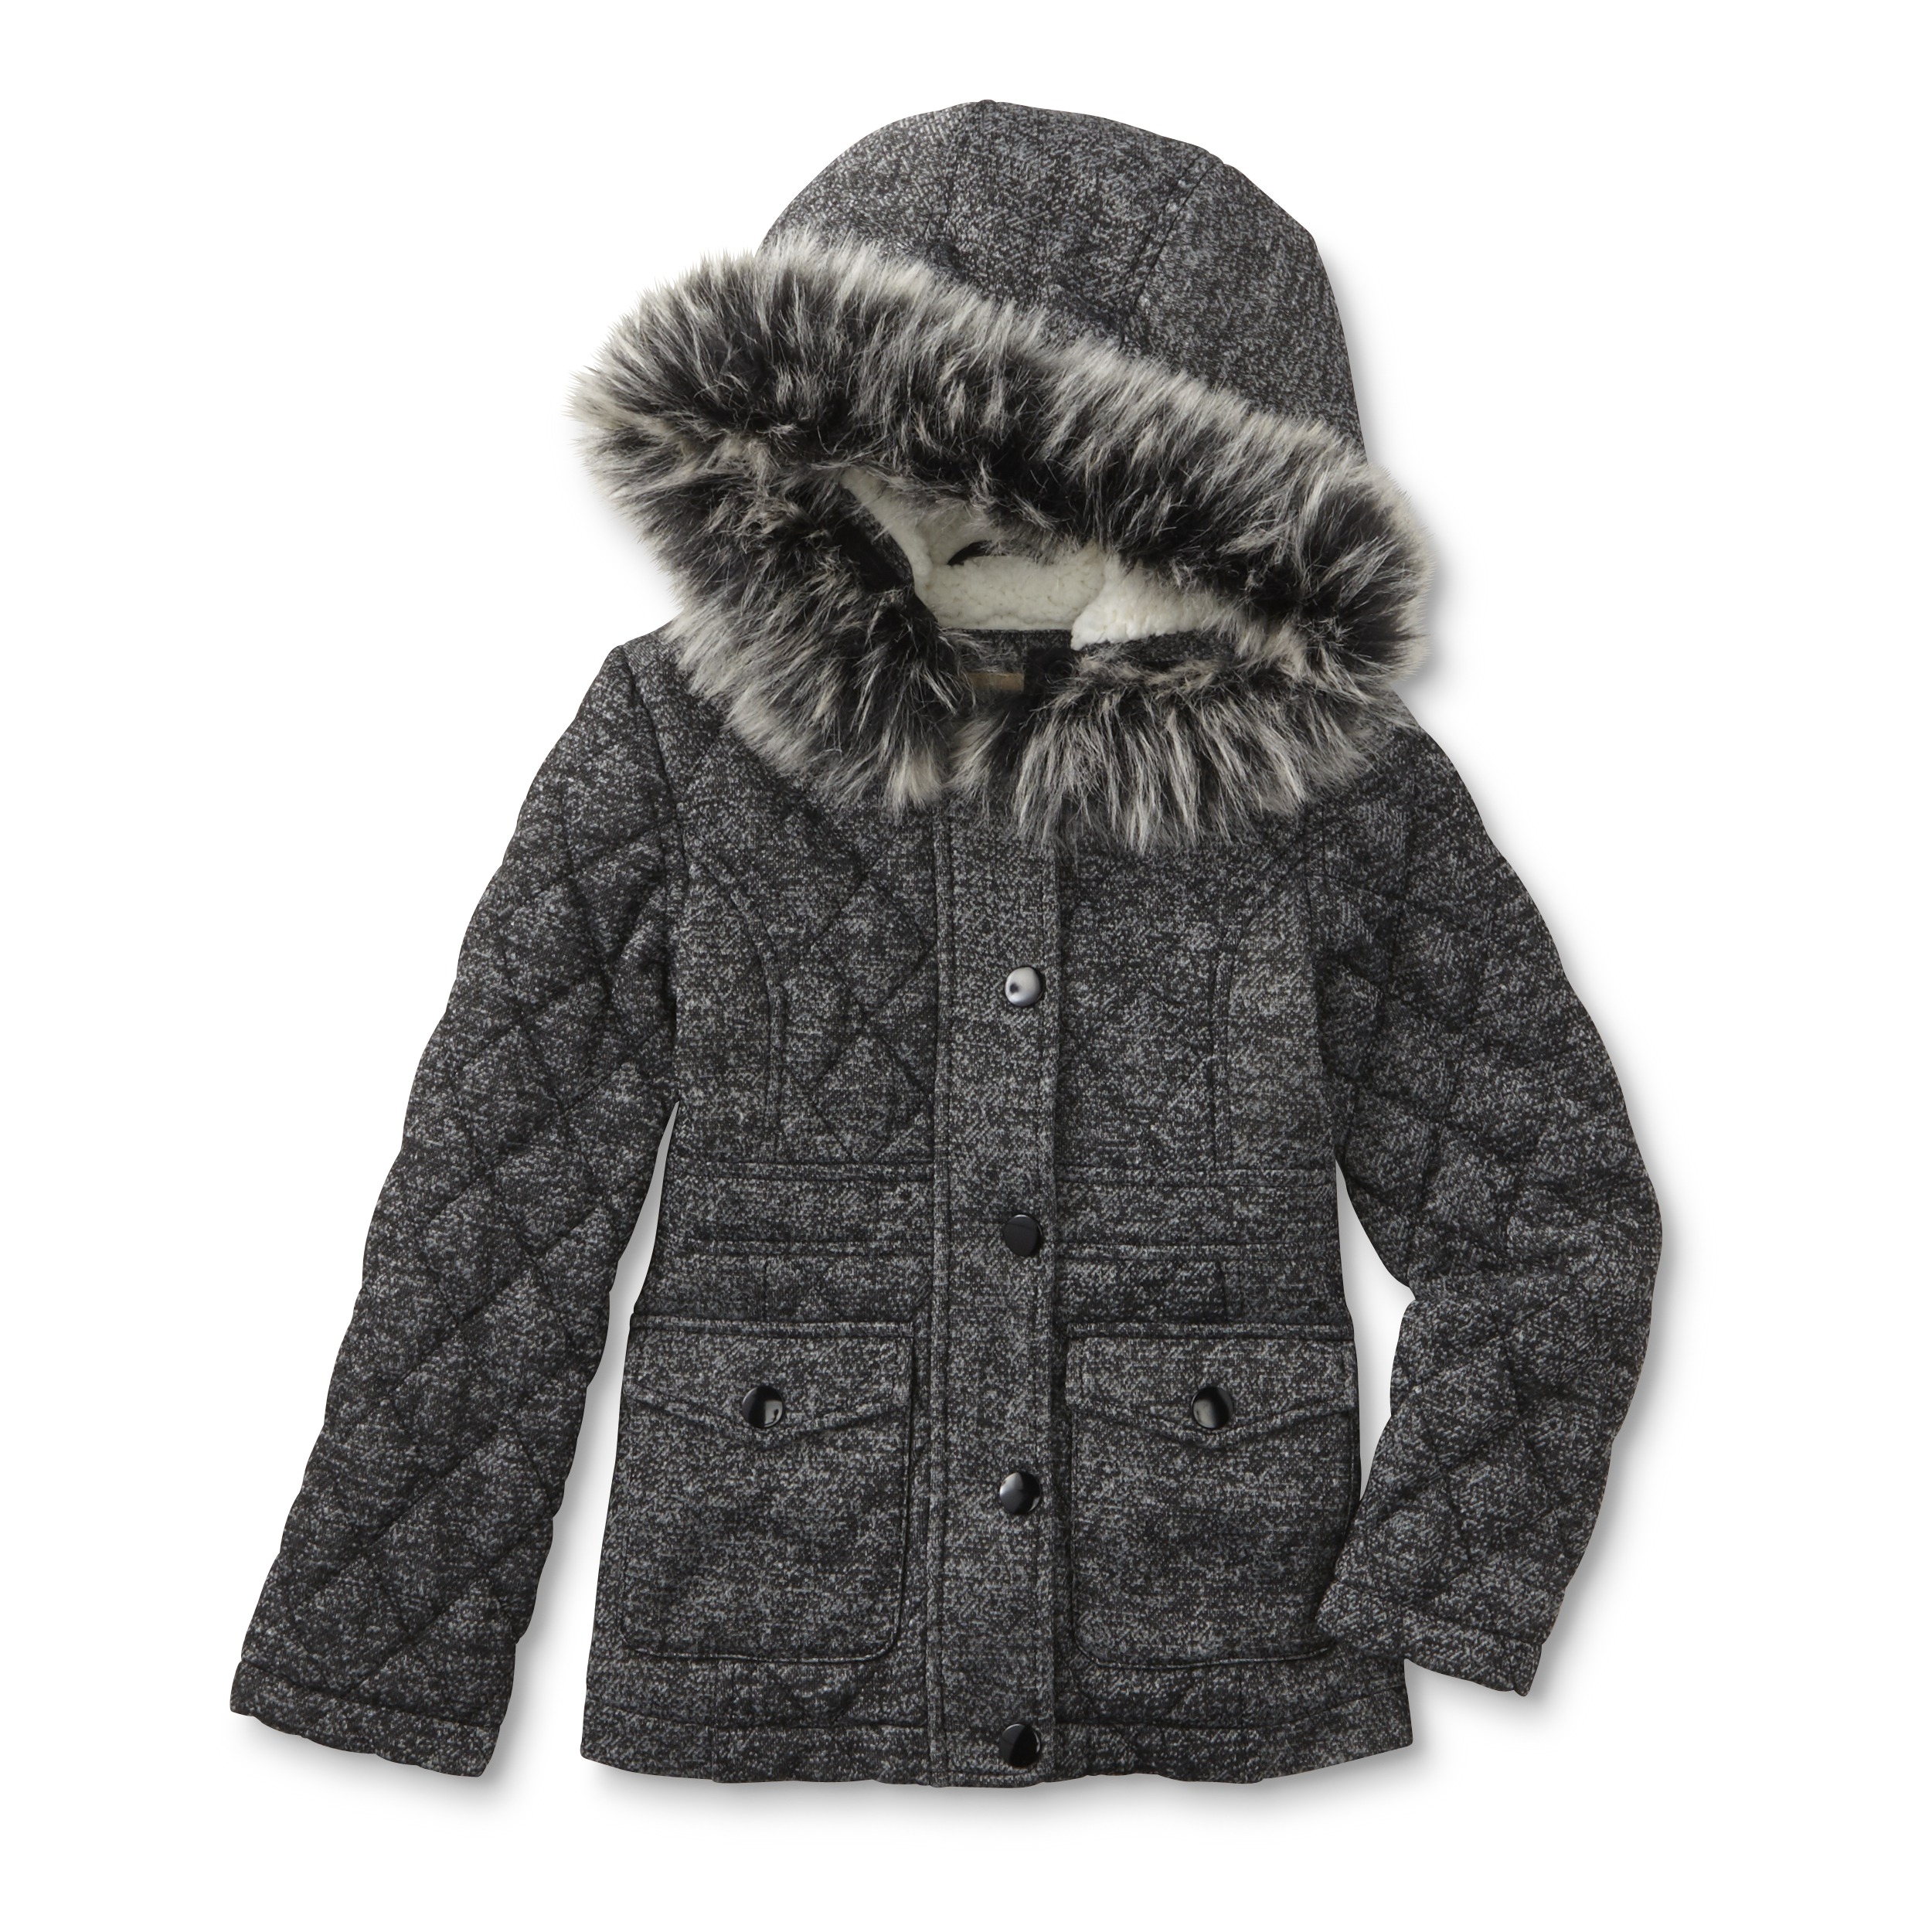 ROEBUCK & CO R1893 Girl's Quilted Jacket - Heathered